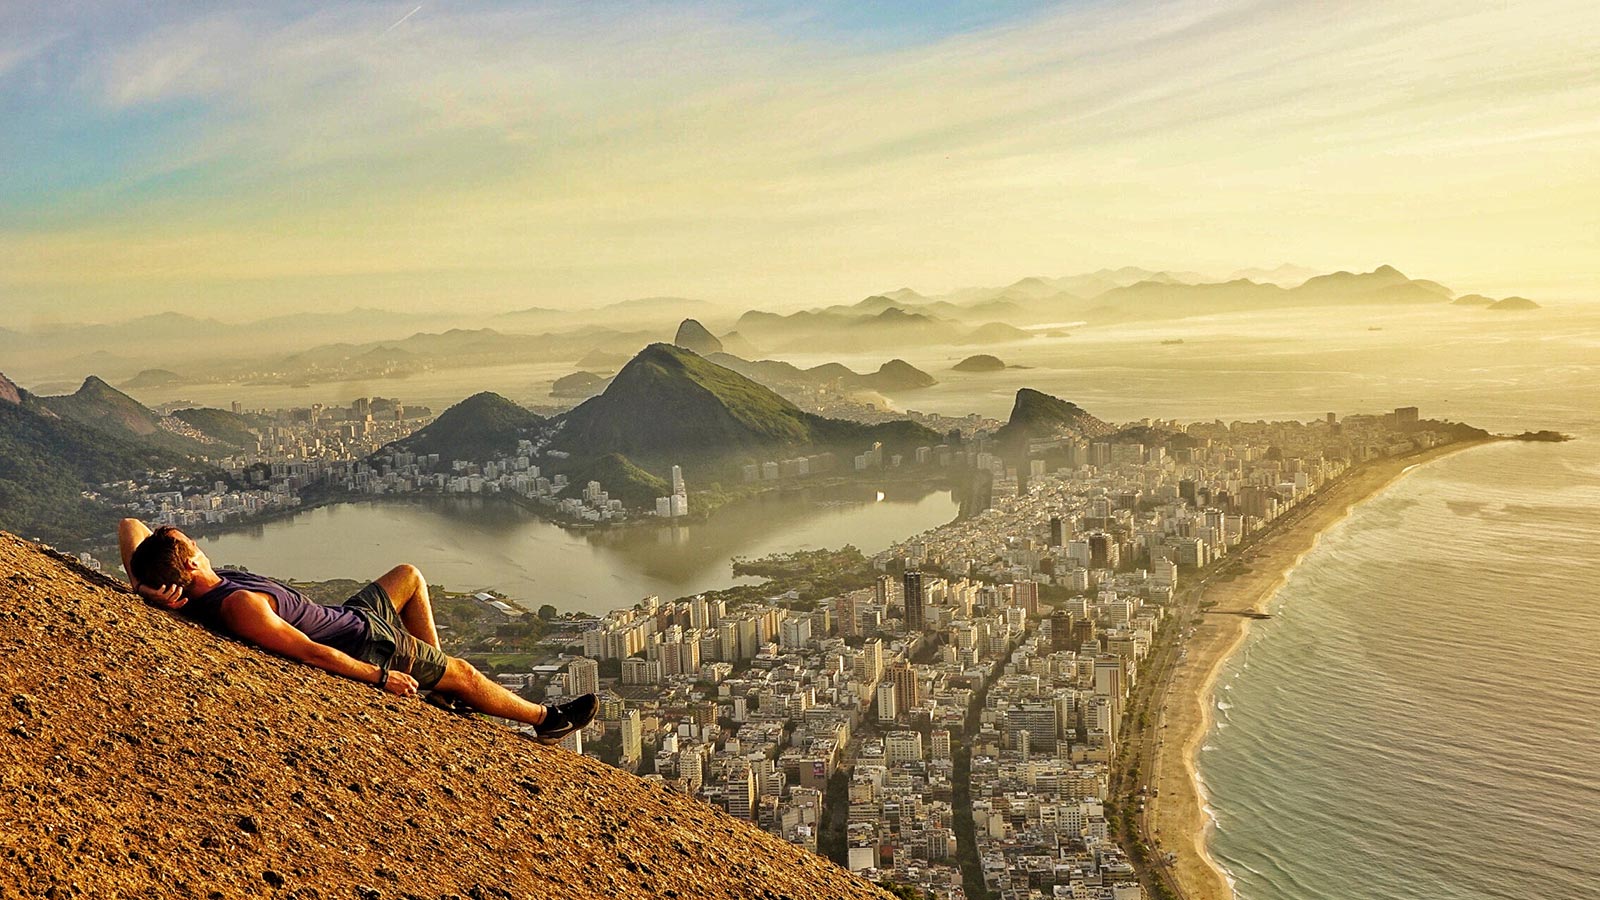 David Simpson lying down and enjoying the view at Two Brothers Peak in Rio de Janeiro, Brazil. Why am I starting a blog?